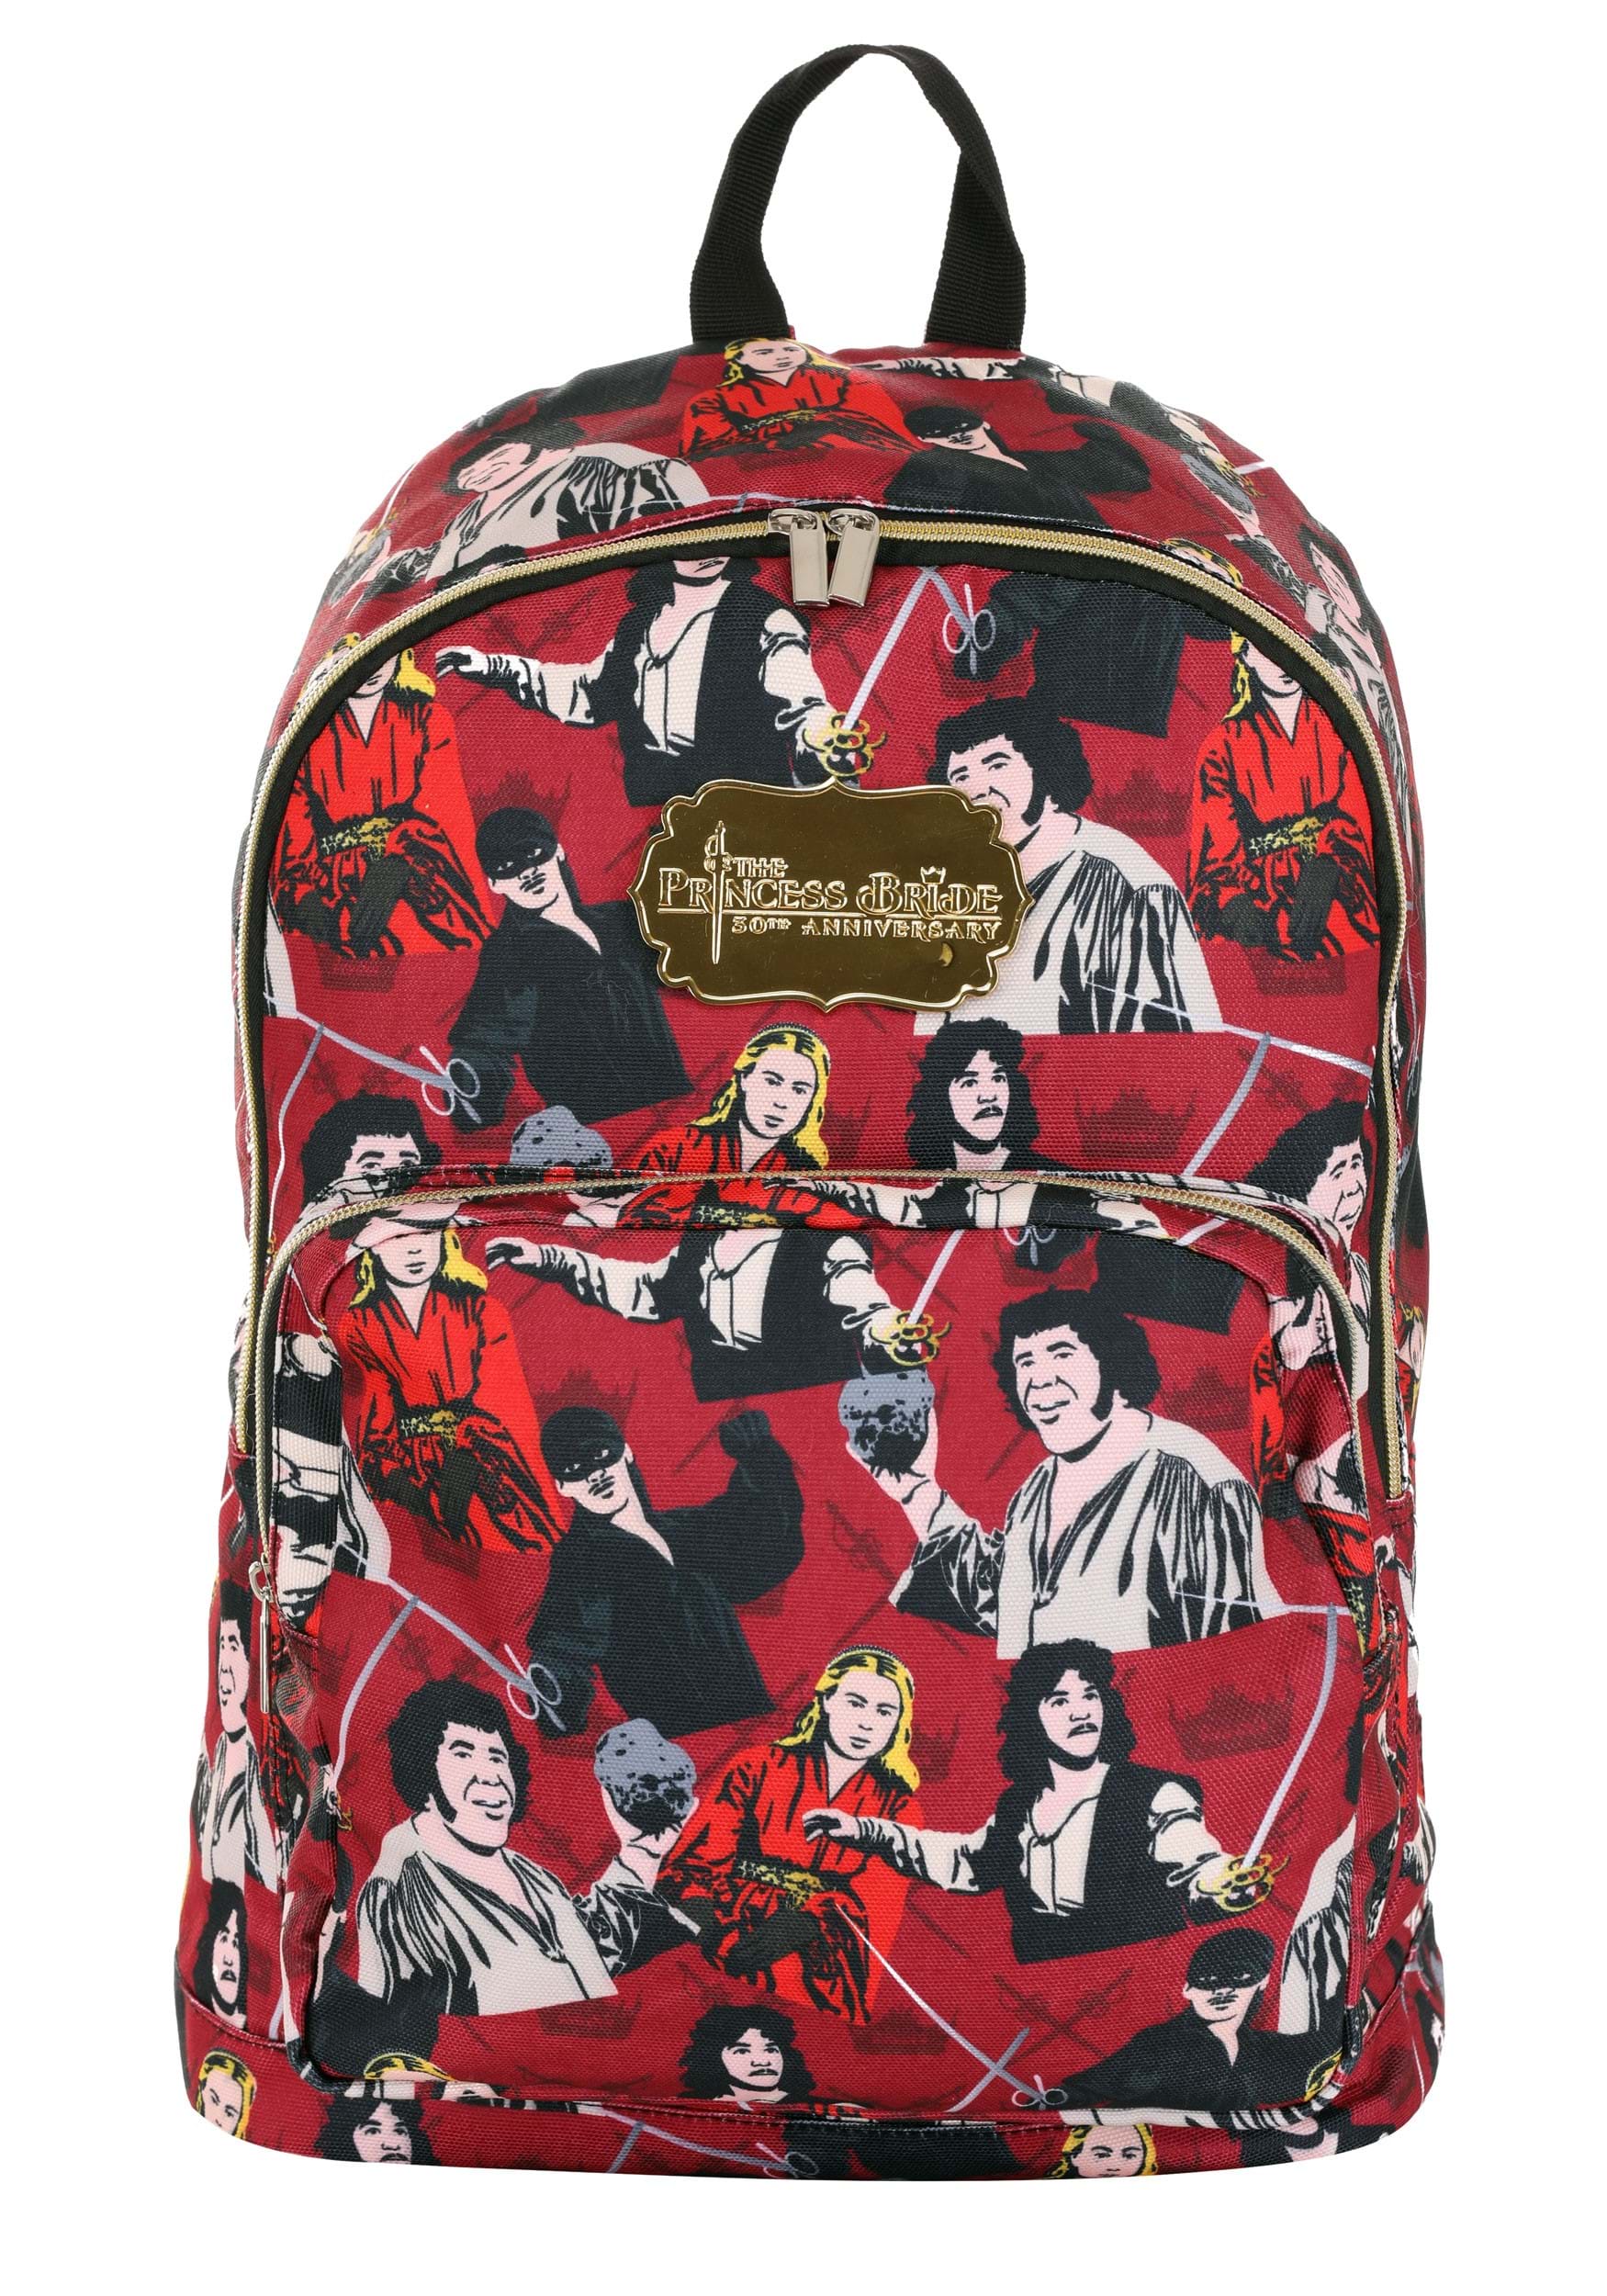 The Princess Bride Red Backpack